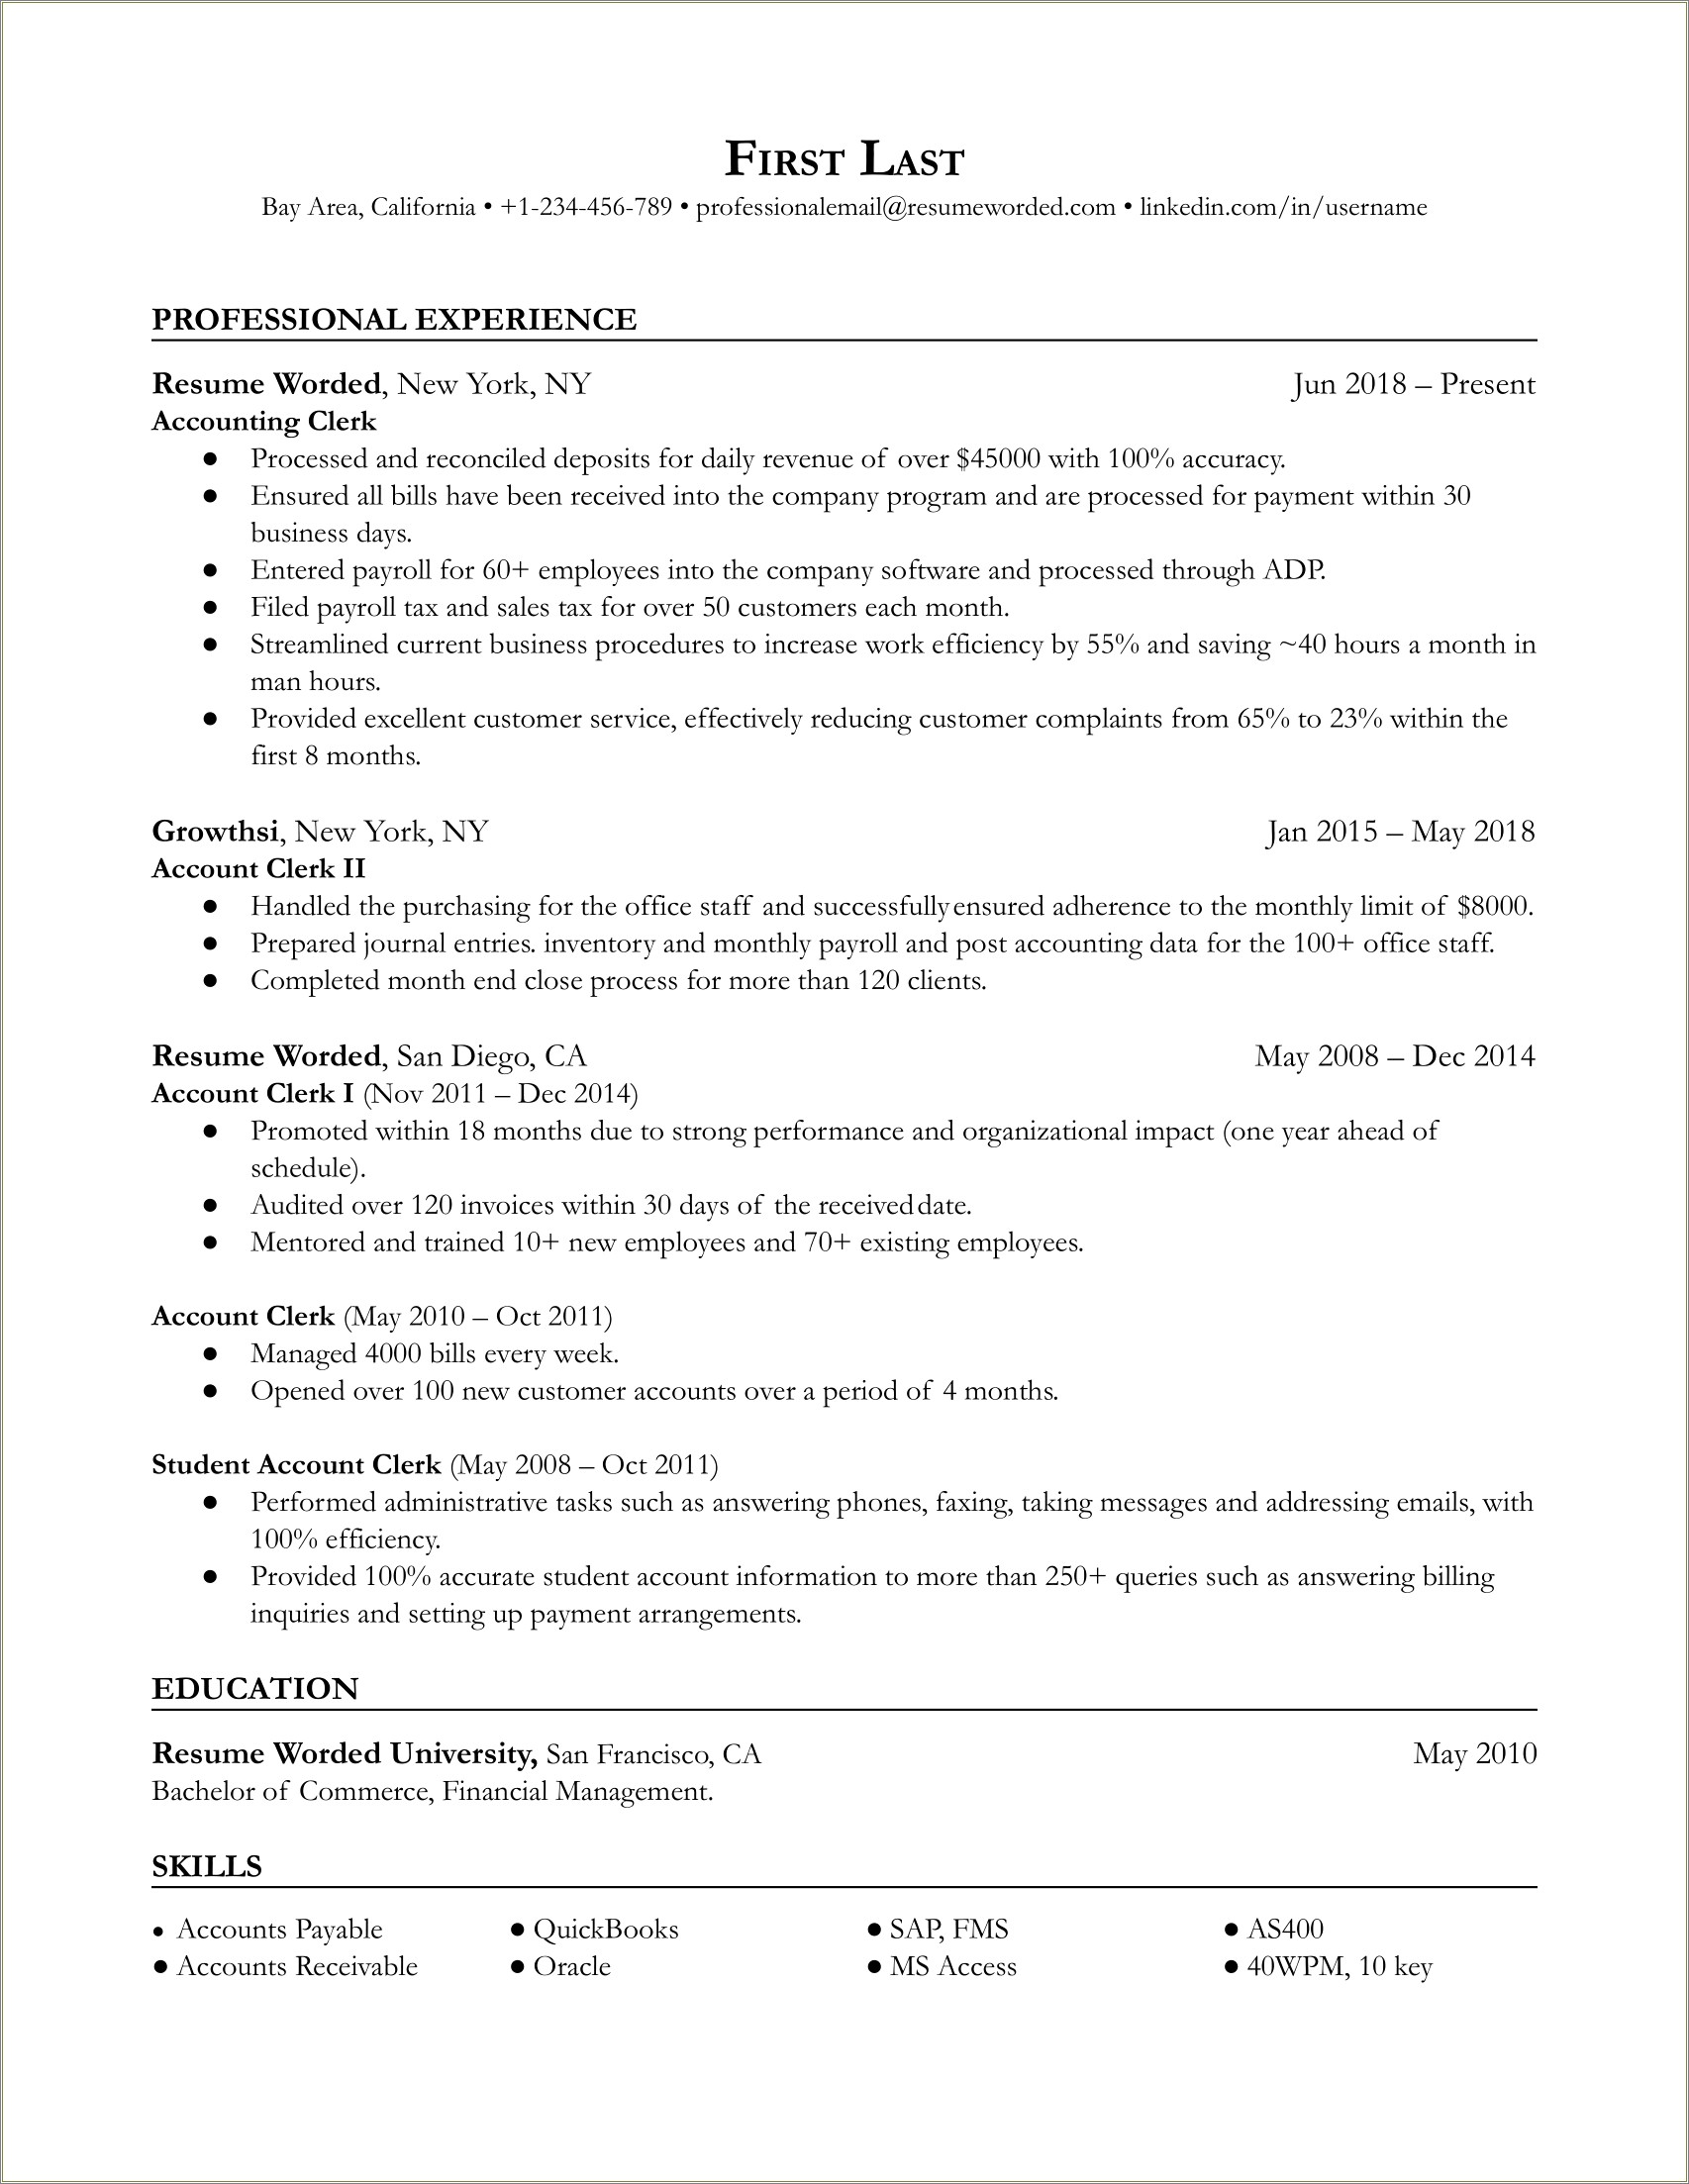 Certified Management Accountant On Resume Linkedin